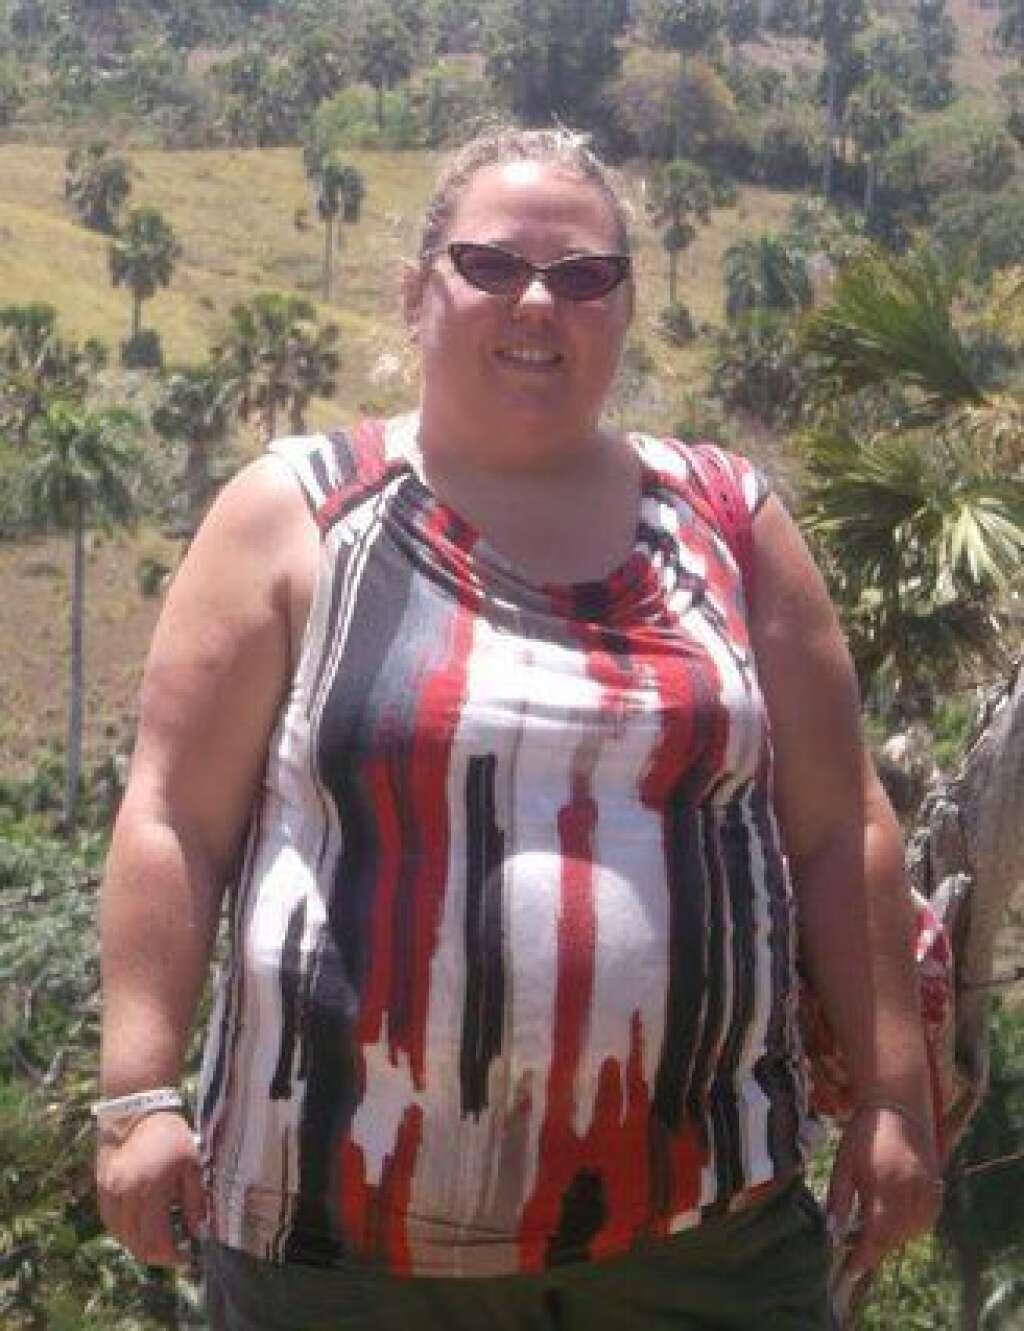 Melissa BEFORE - <a href="http://www.huffingtonpost.ca/2016/07/12/weight-lost_n_10944804.html" target="_blank">Read the story here.</a>